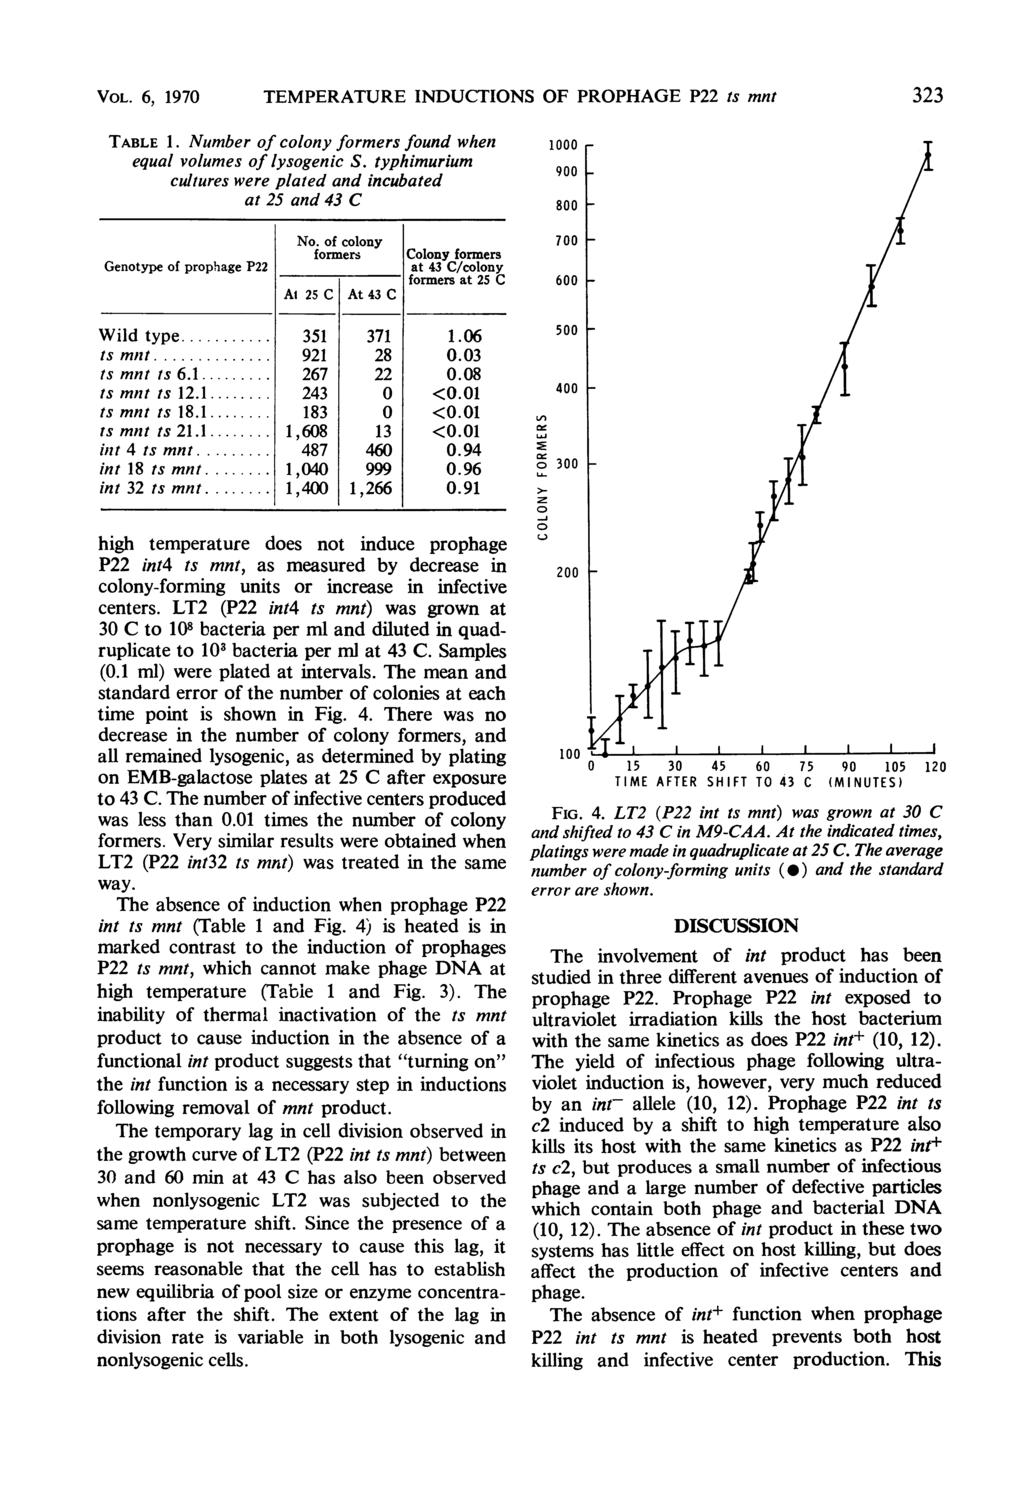 VOL. 6, 1970 TEMPERATURE INDUCTIONS OF PROPHAGE P22 ts mnt 323 TABLE 1. Number of colony formers found when equal volumes of lysogenic S.